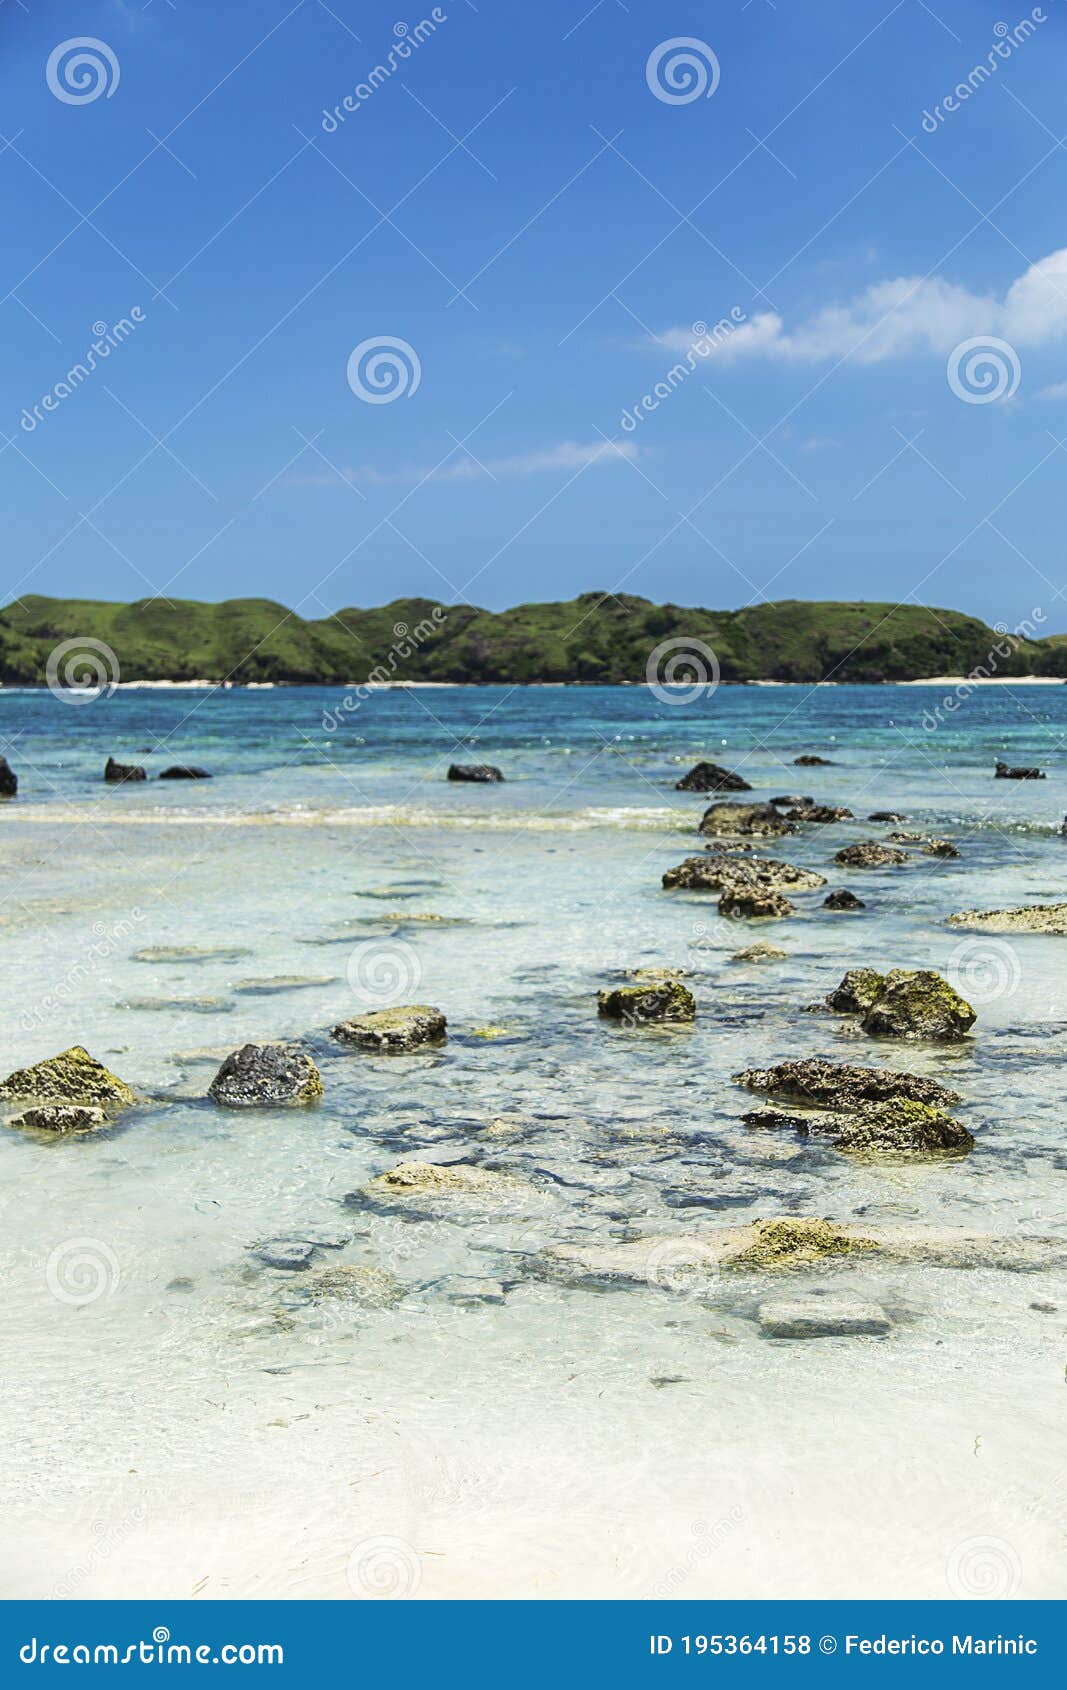 rocks in a transparente light blue sea and mountains at the background